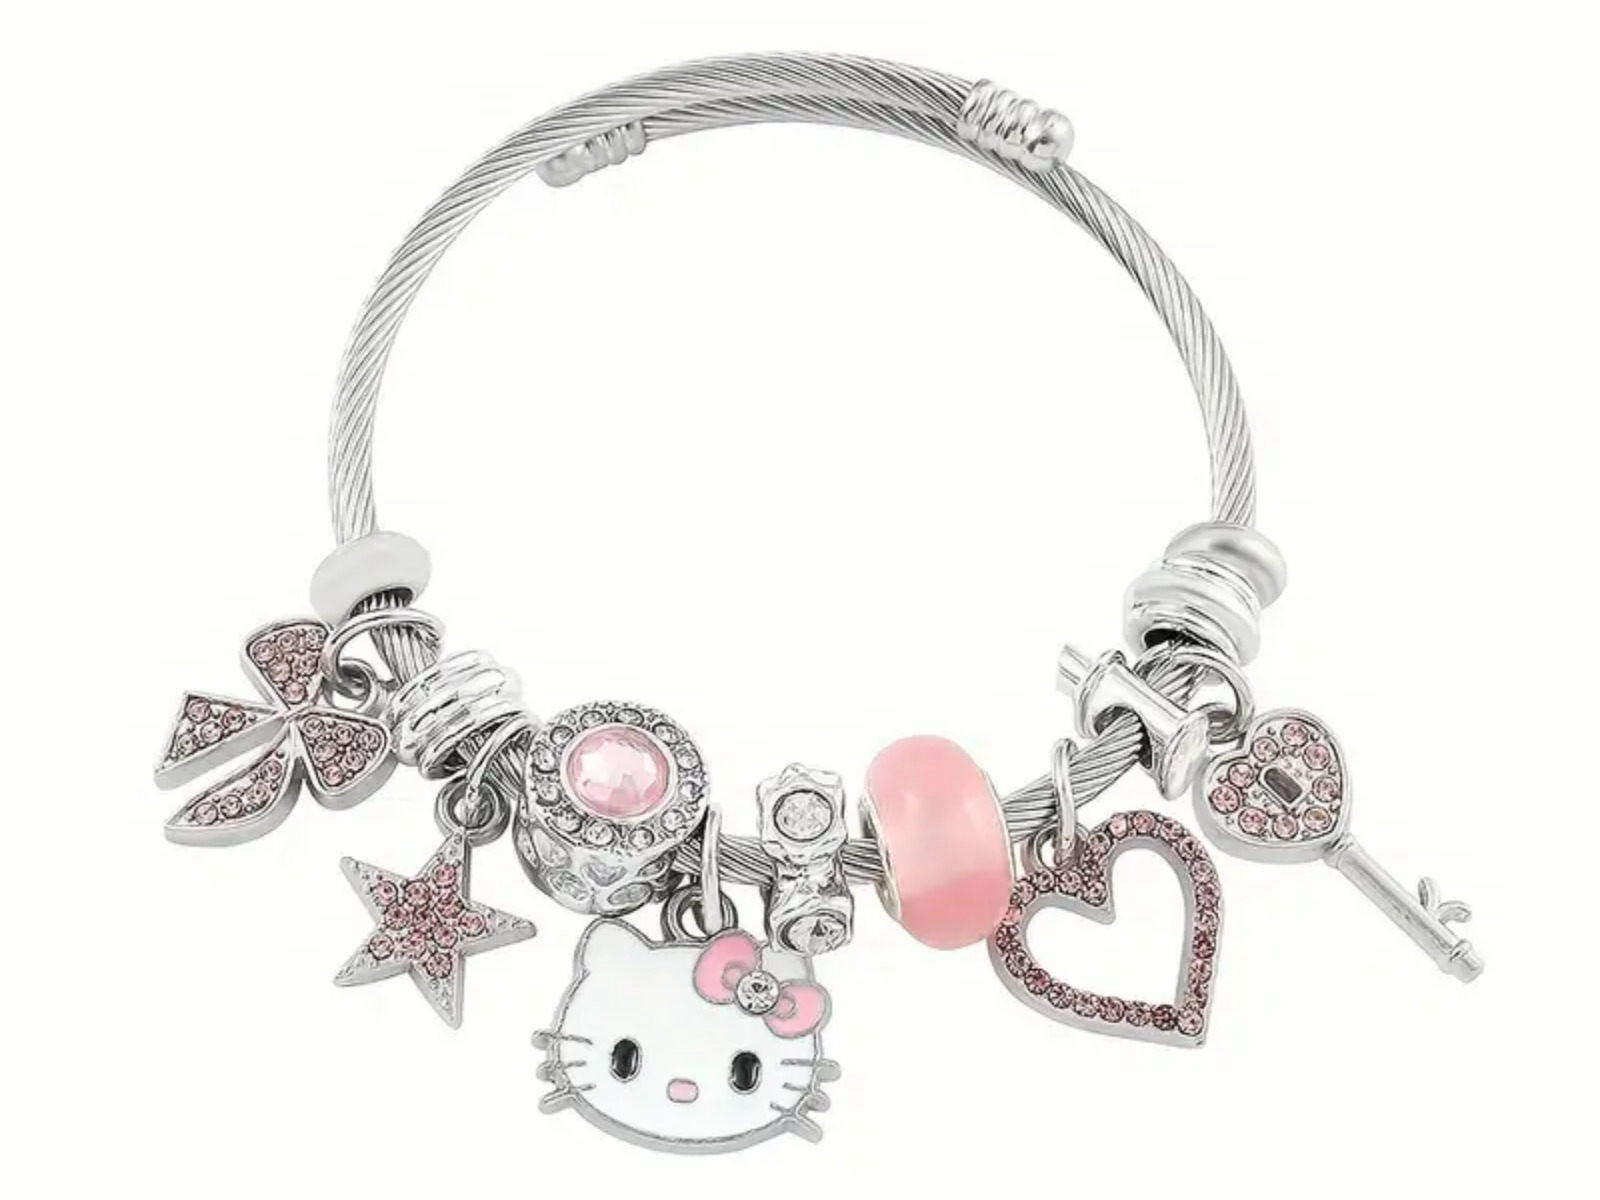 Kello kitty Bracelet with Charms pieces in Pink